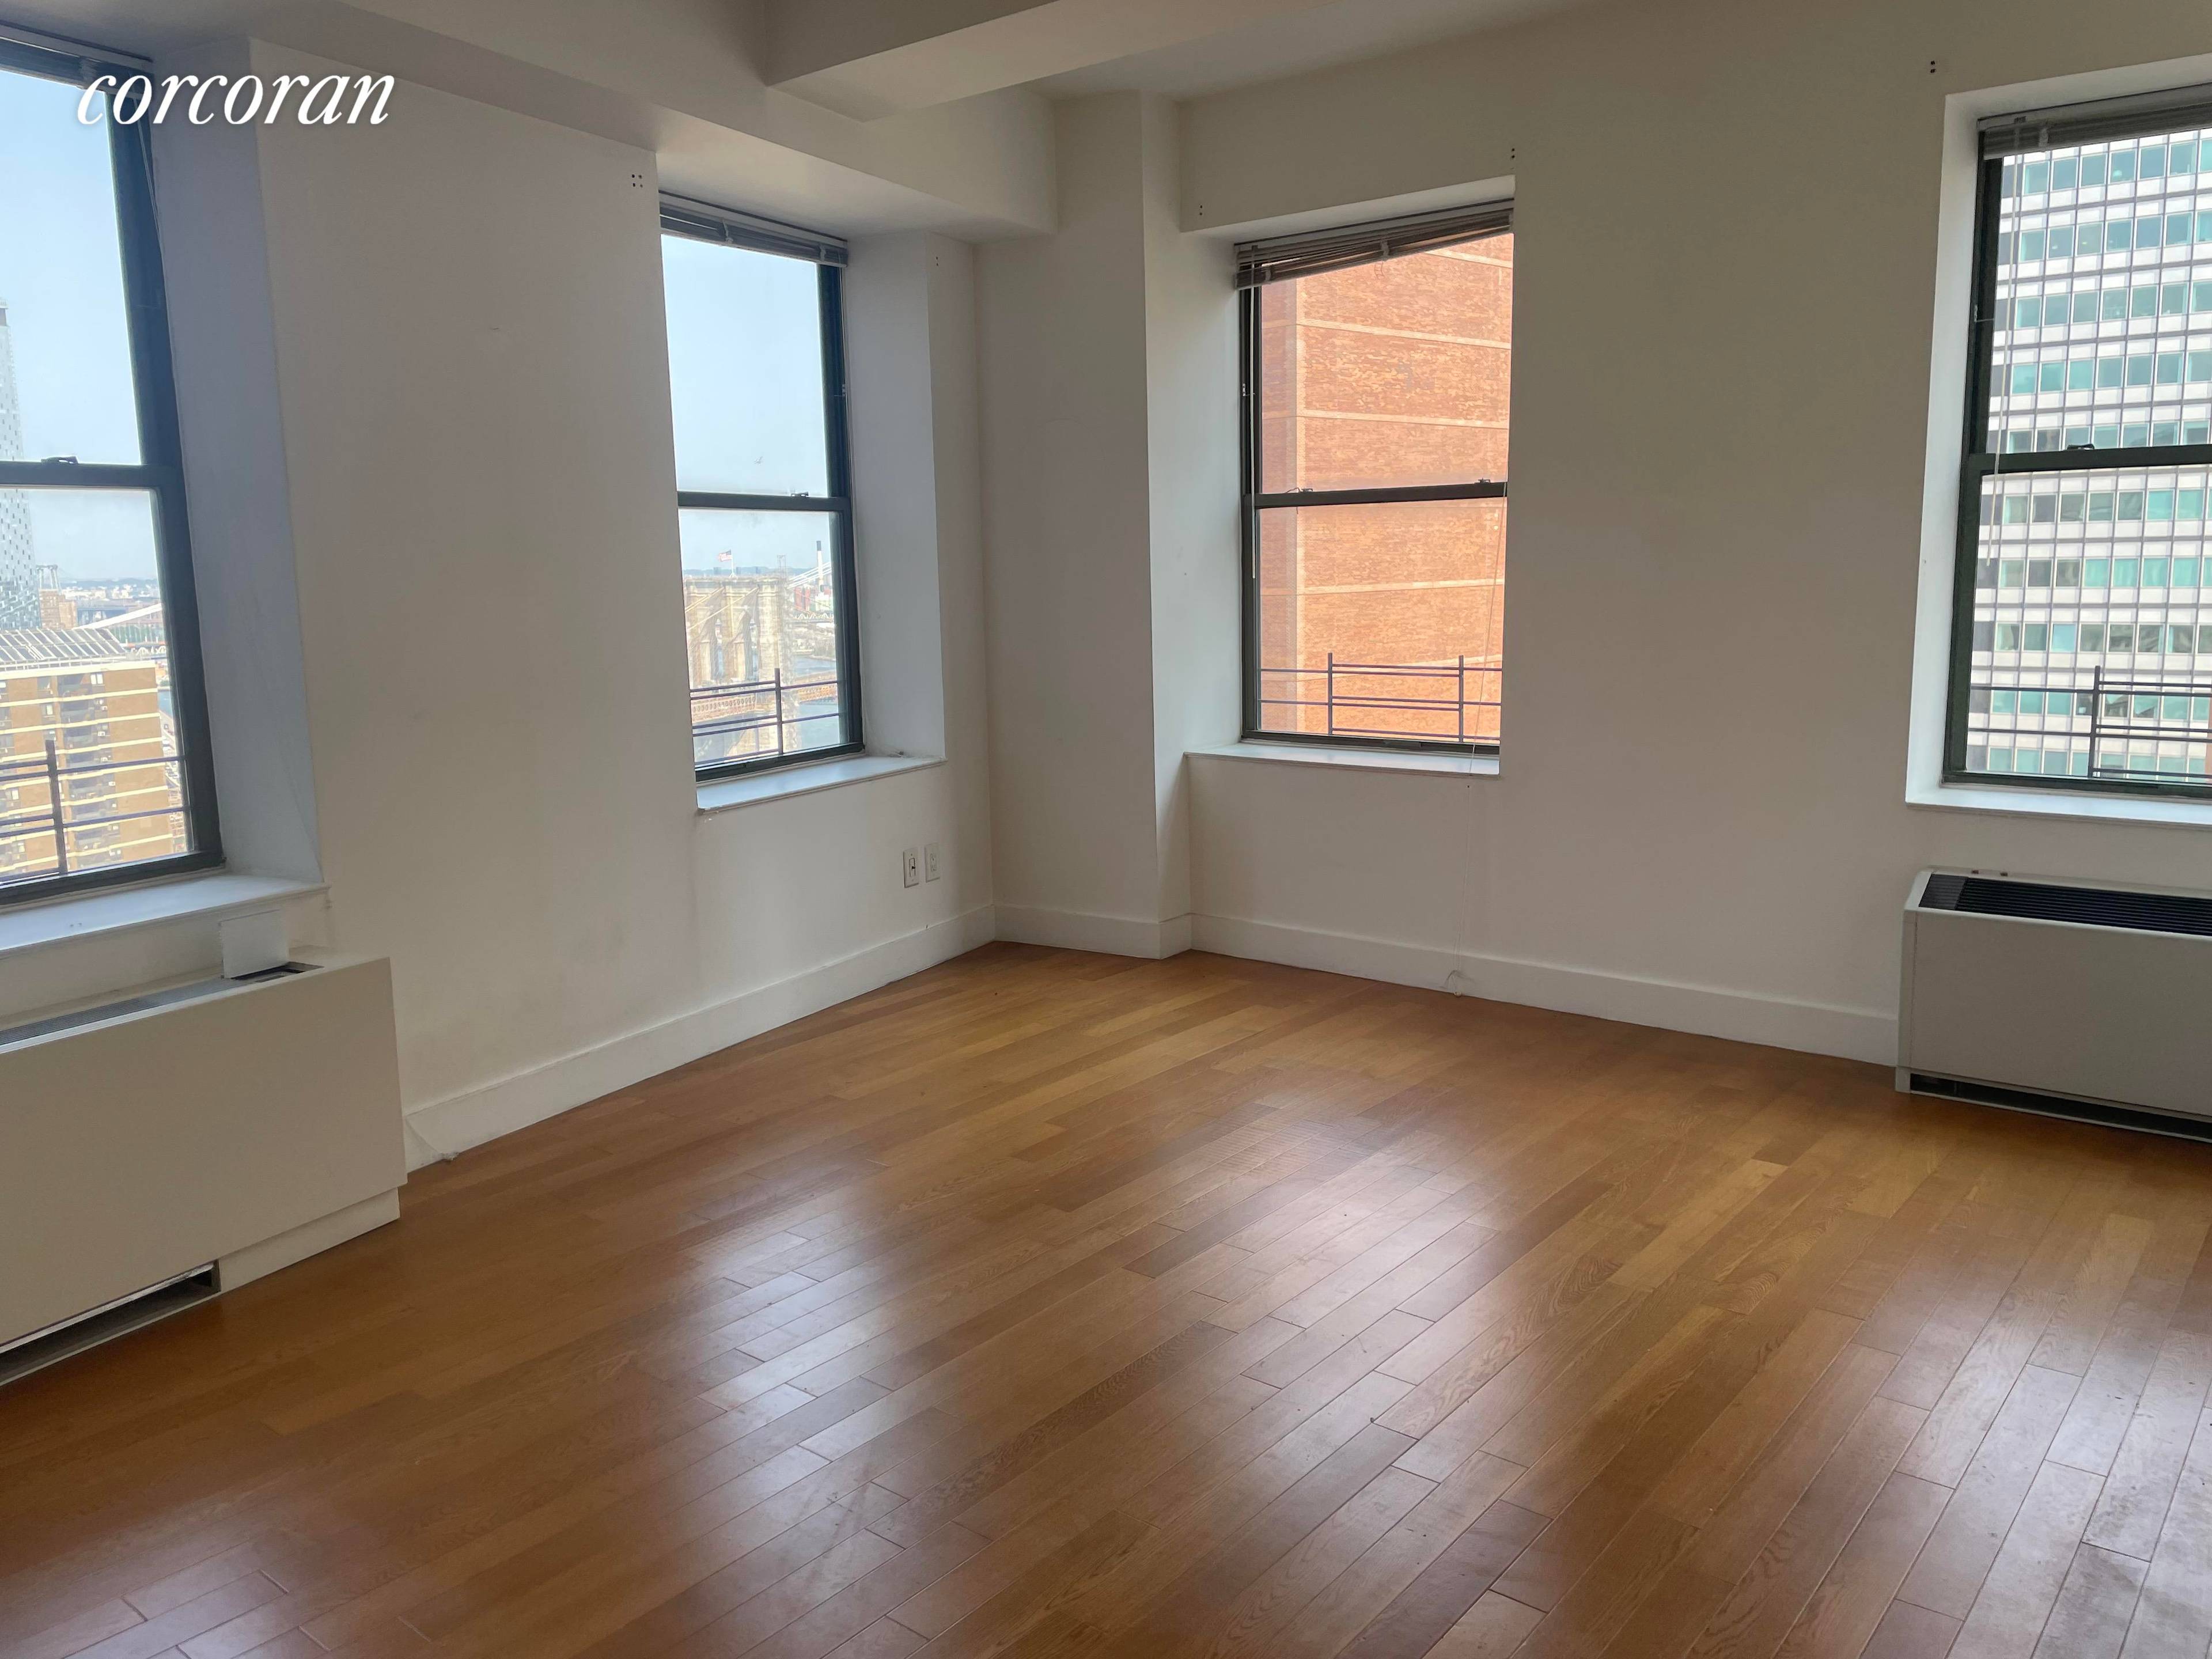 Unit 2408 features 6 oversized windows, stunning water and bridge views, 11 foot ceilings, hardwood floors throughout, tons of closet space, updated bathroom and kitchen with the latest fixtures, and ...